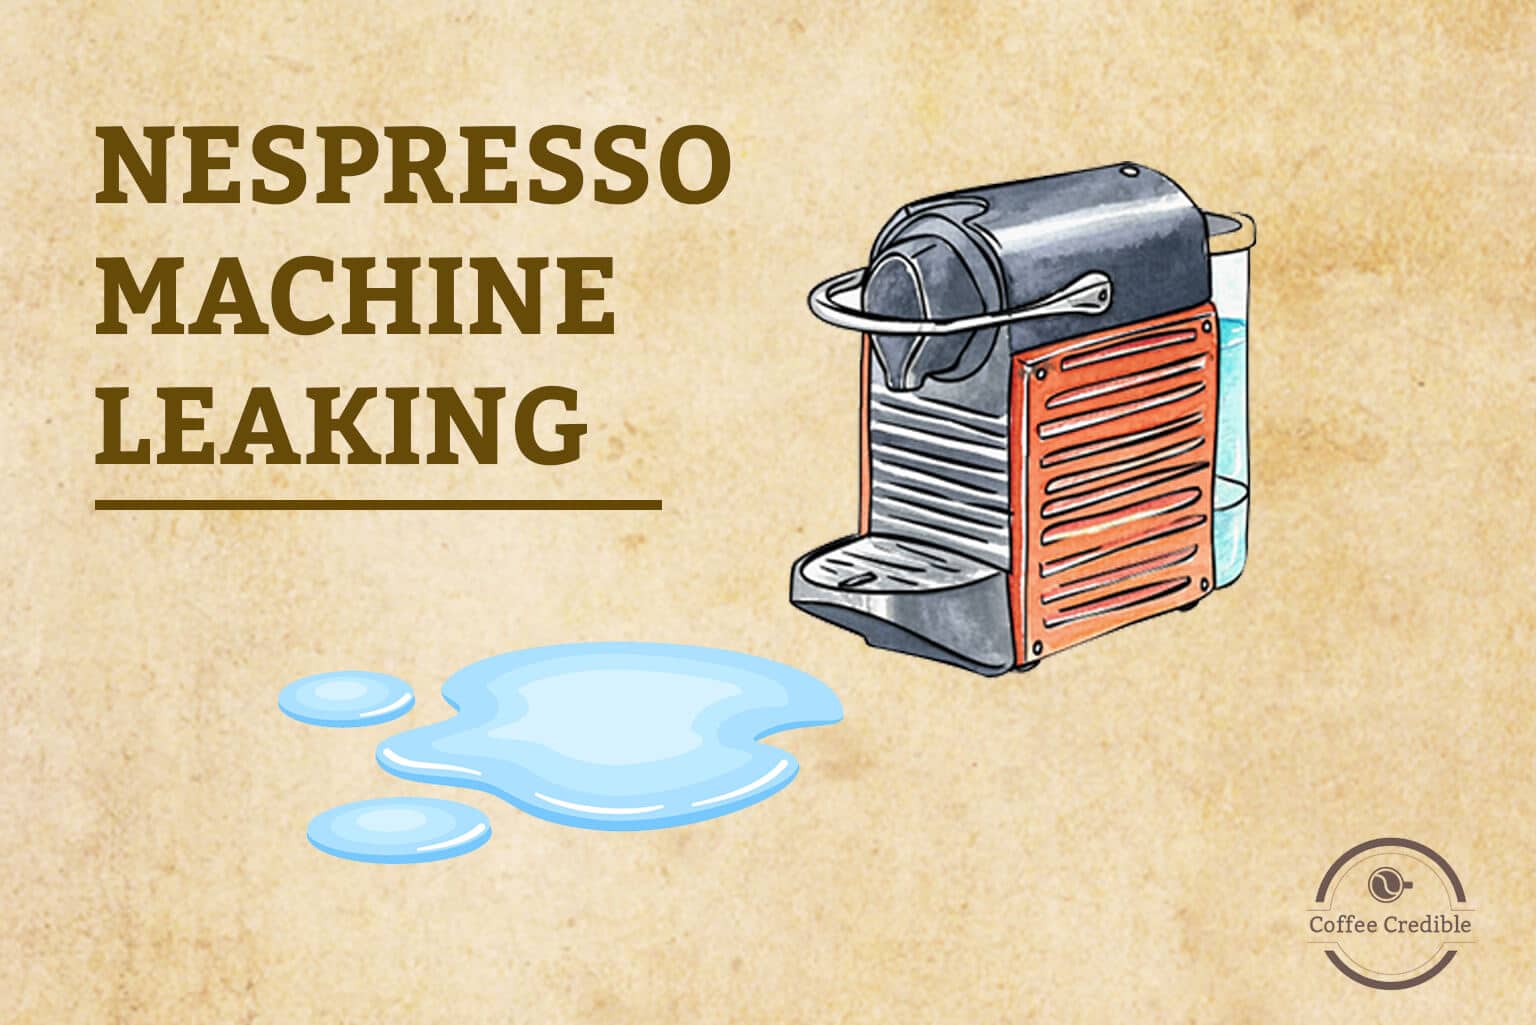 How To Fix Nespresso Machine Leaking Water Or Coffee? [A Step-By-Step Guide]